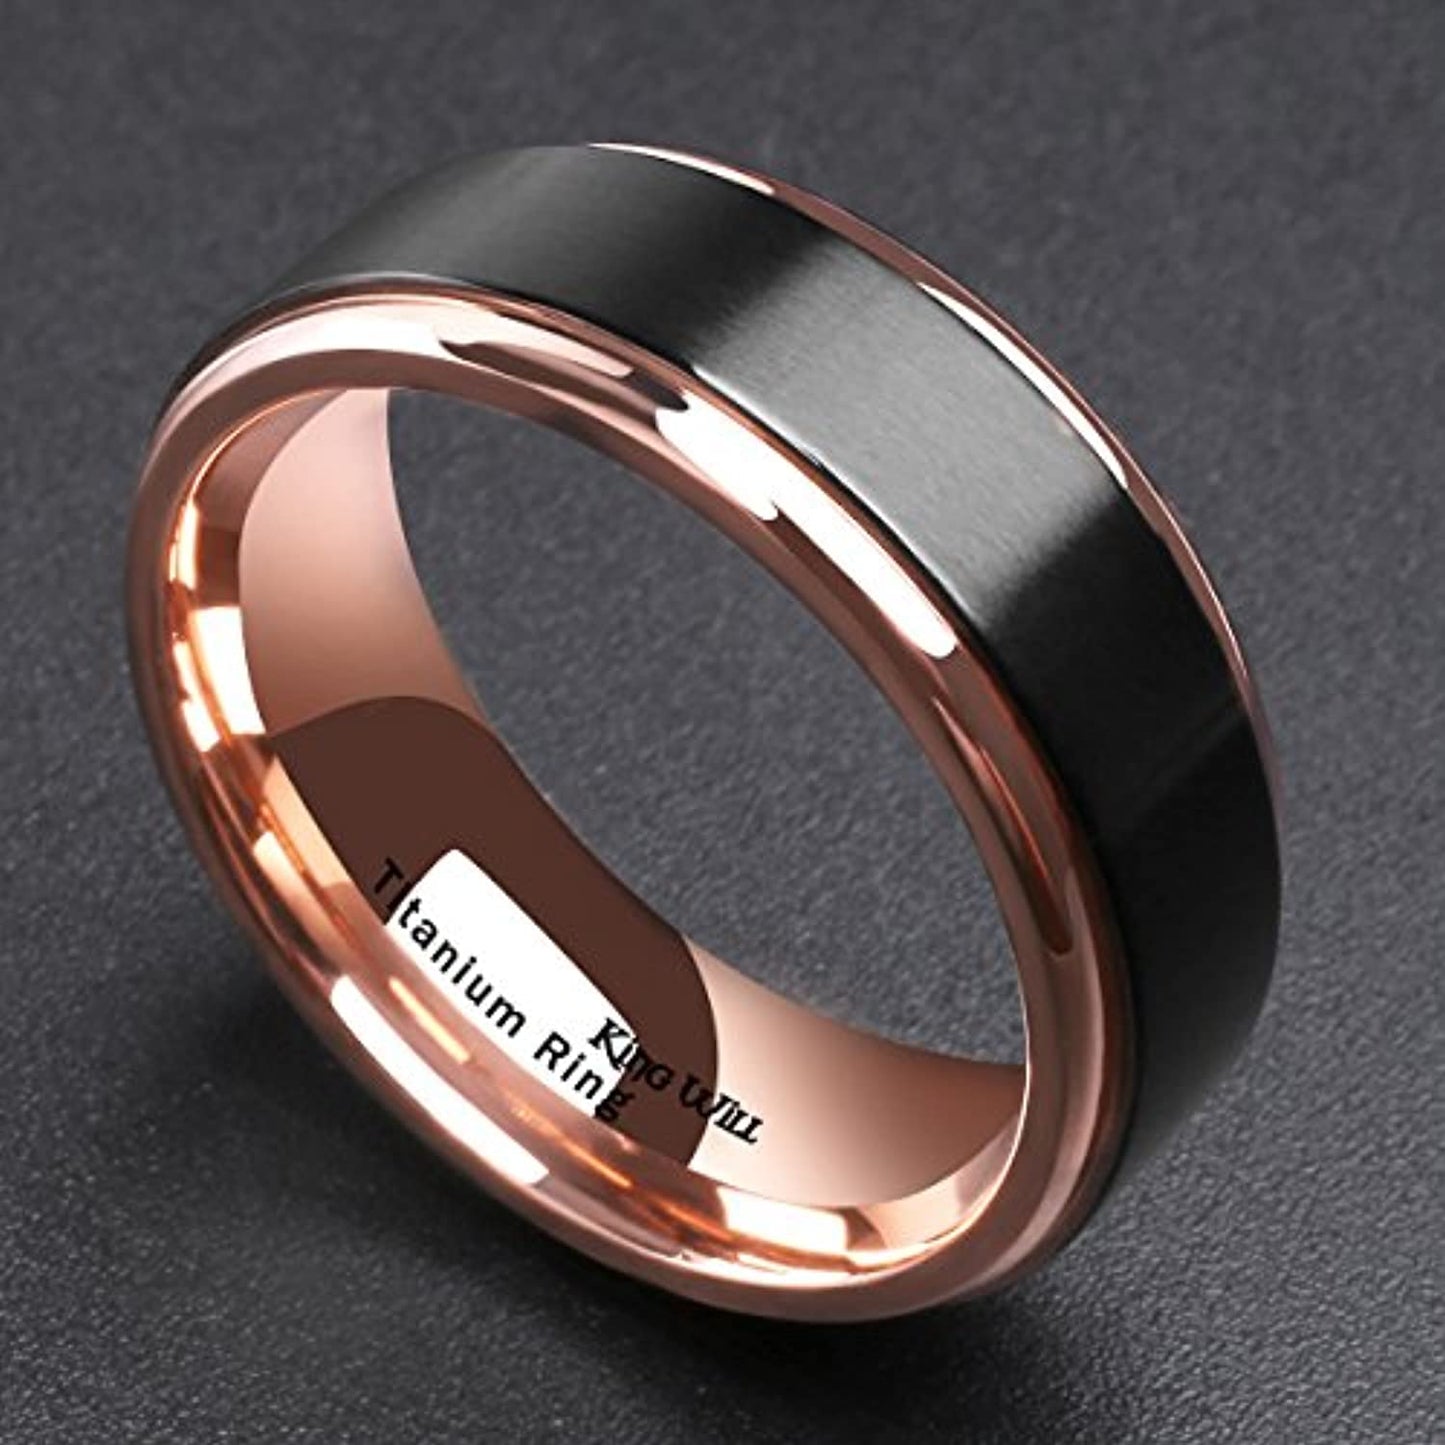 Rose Gold Beveled Tungsten Carbide Ring with Brushed Black Inlay | 8mm